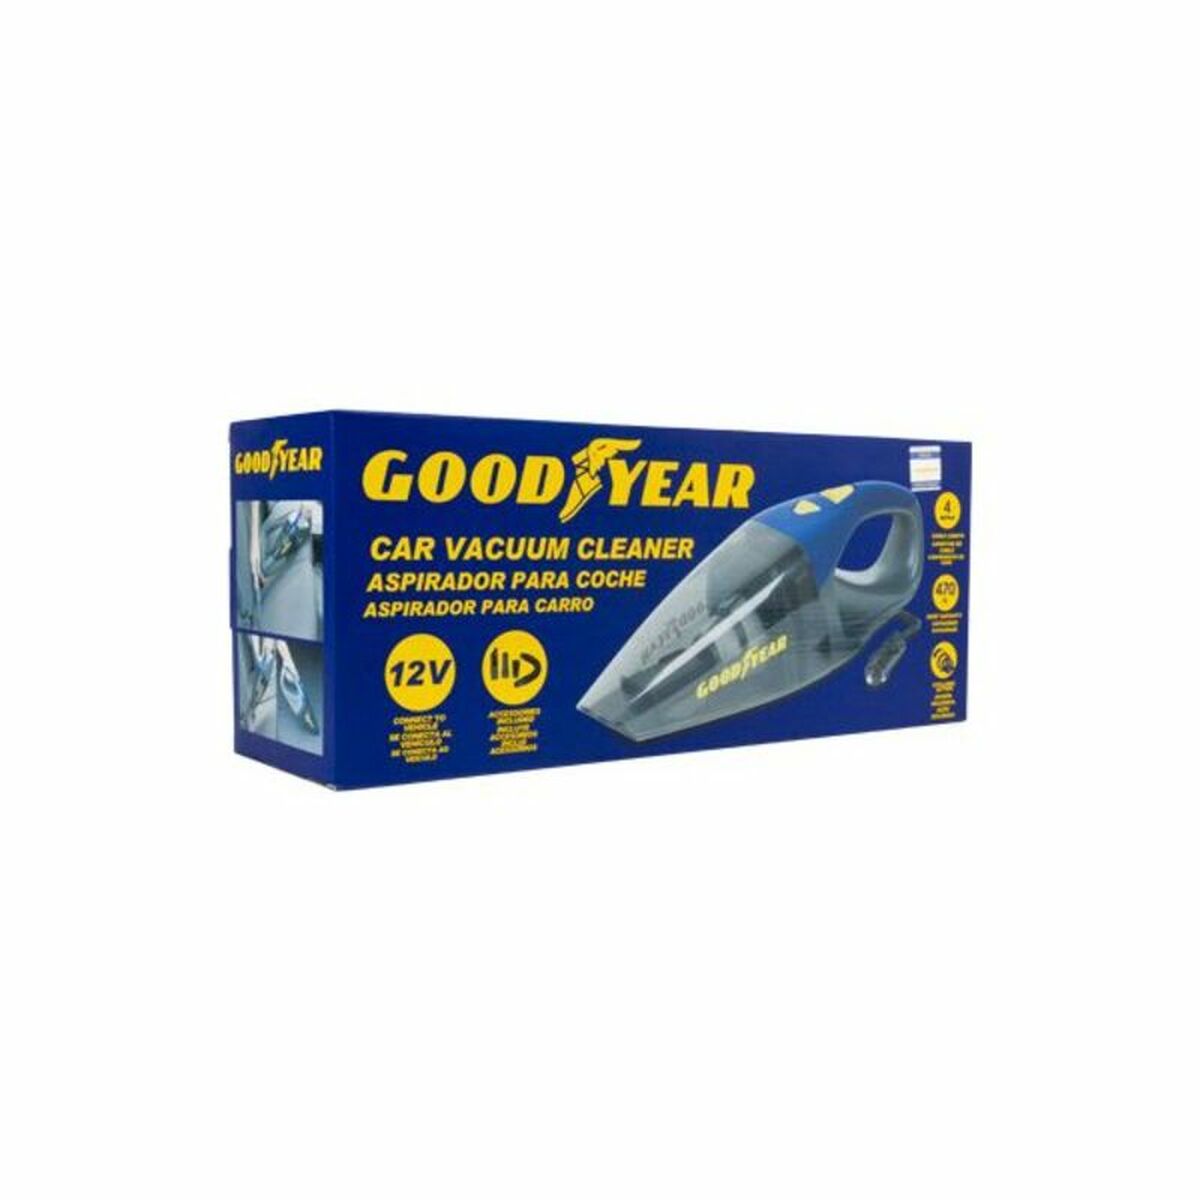 GOODYEAR Portable Vacuum Cleaner (90W – 12v)